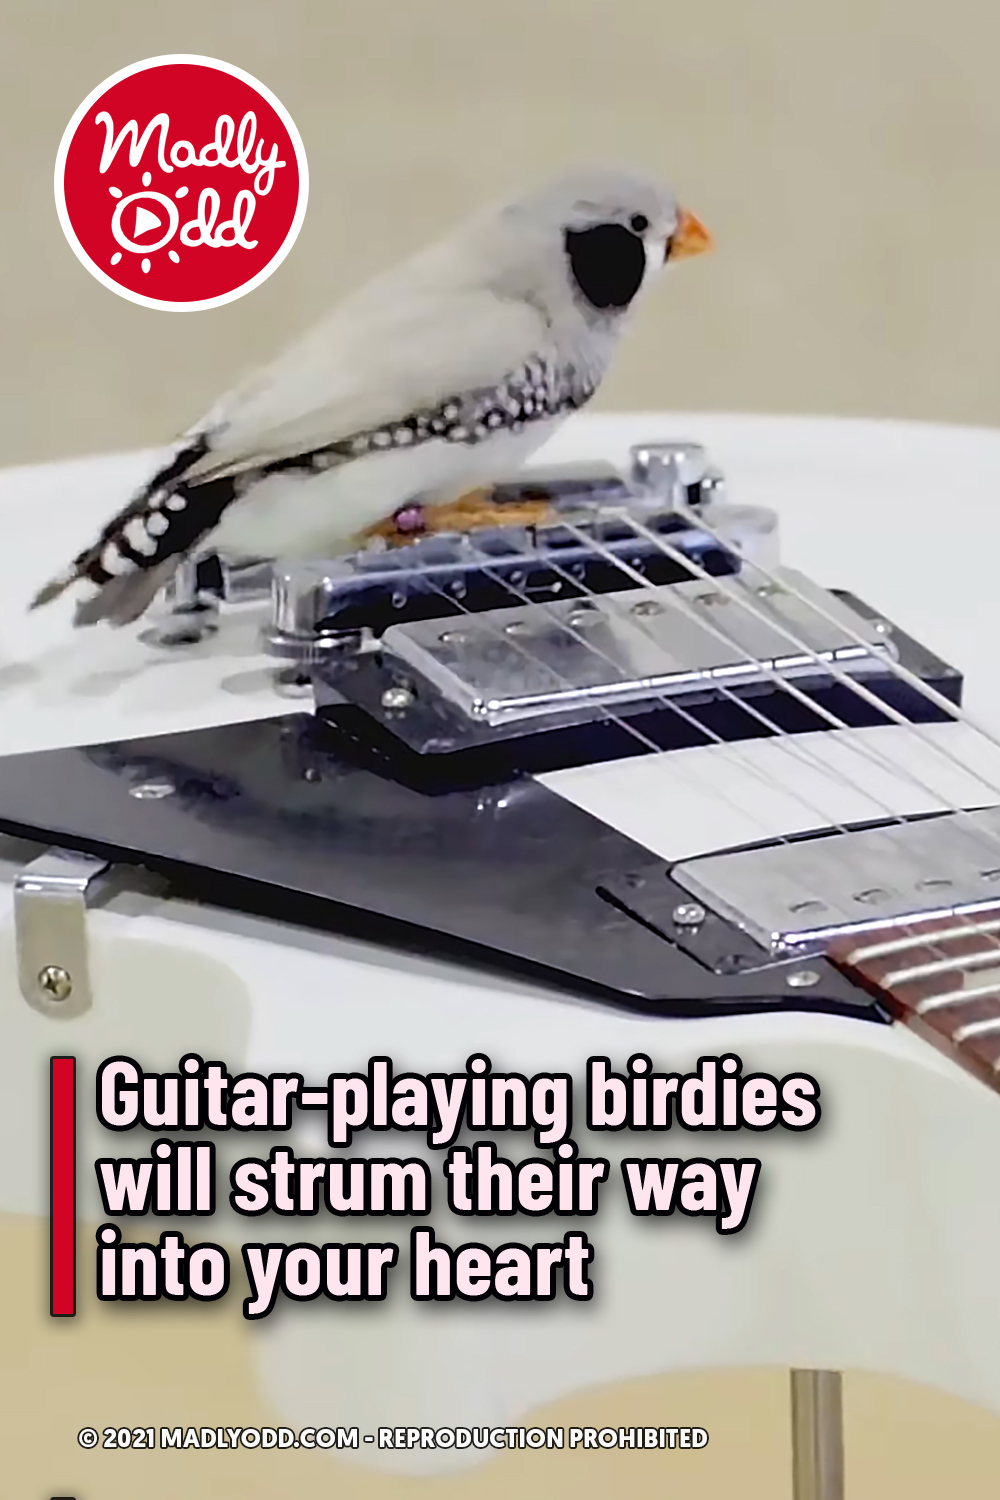 Guitar-playing birdies will strum their way into your heart